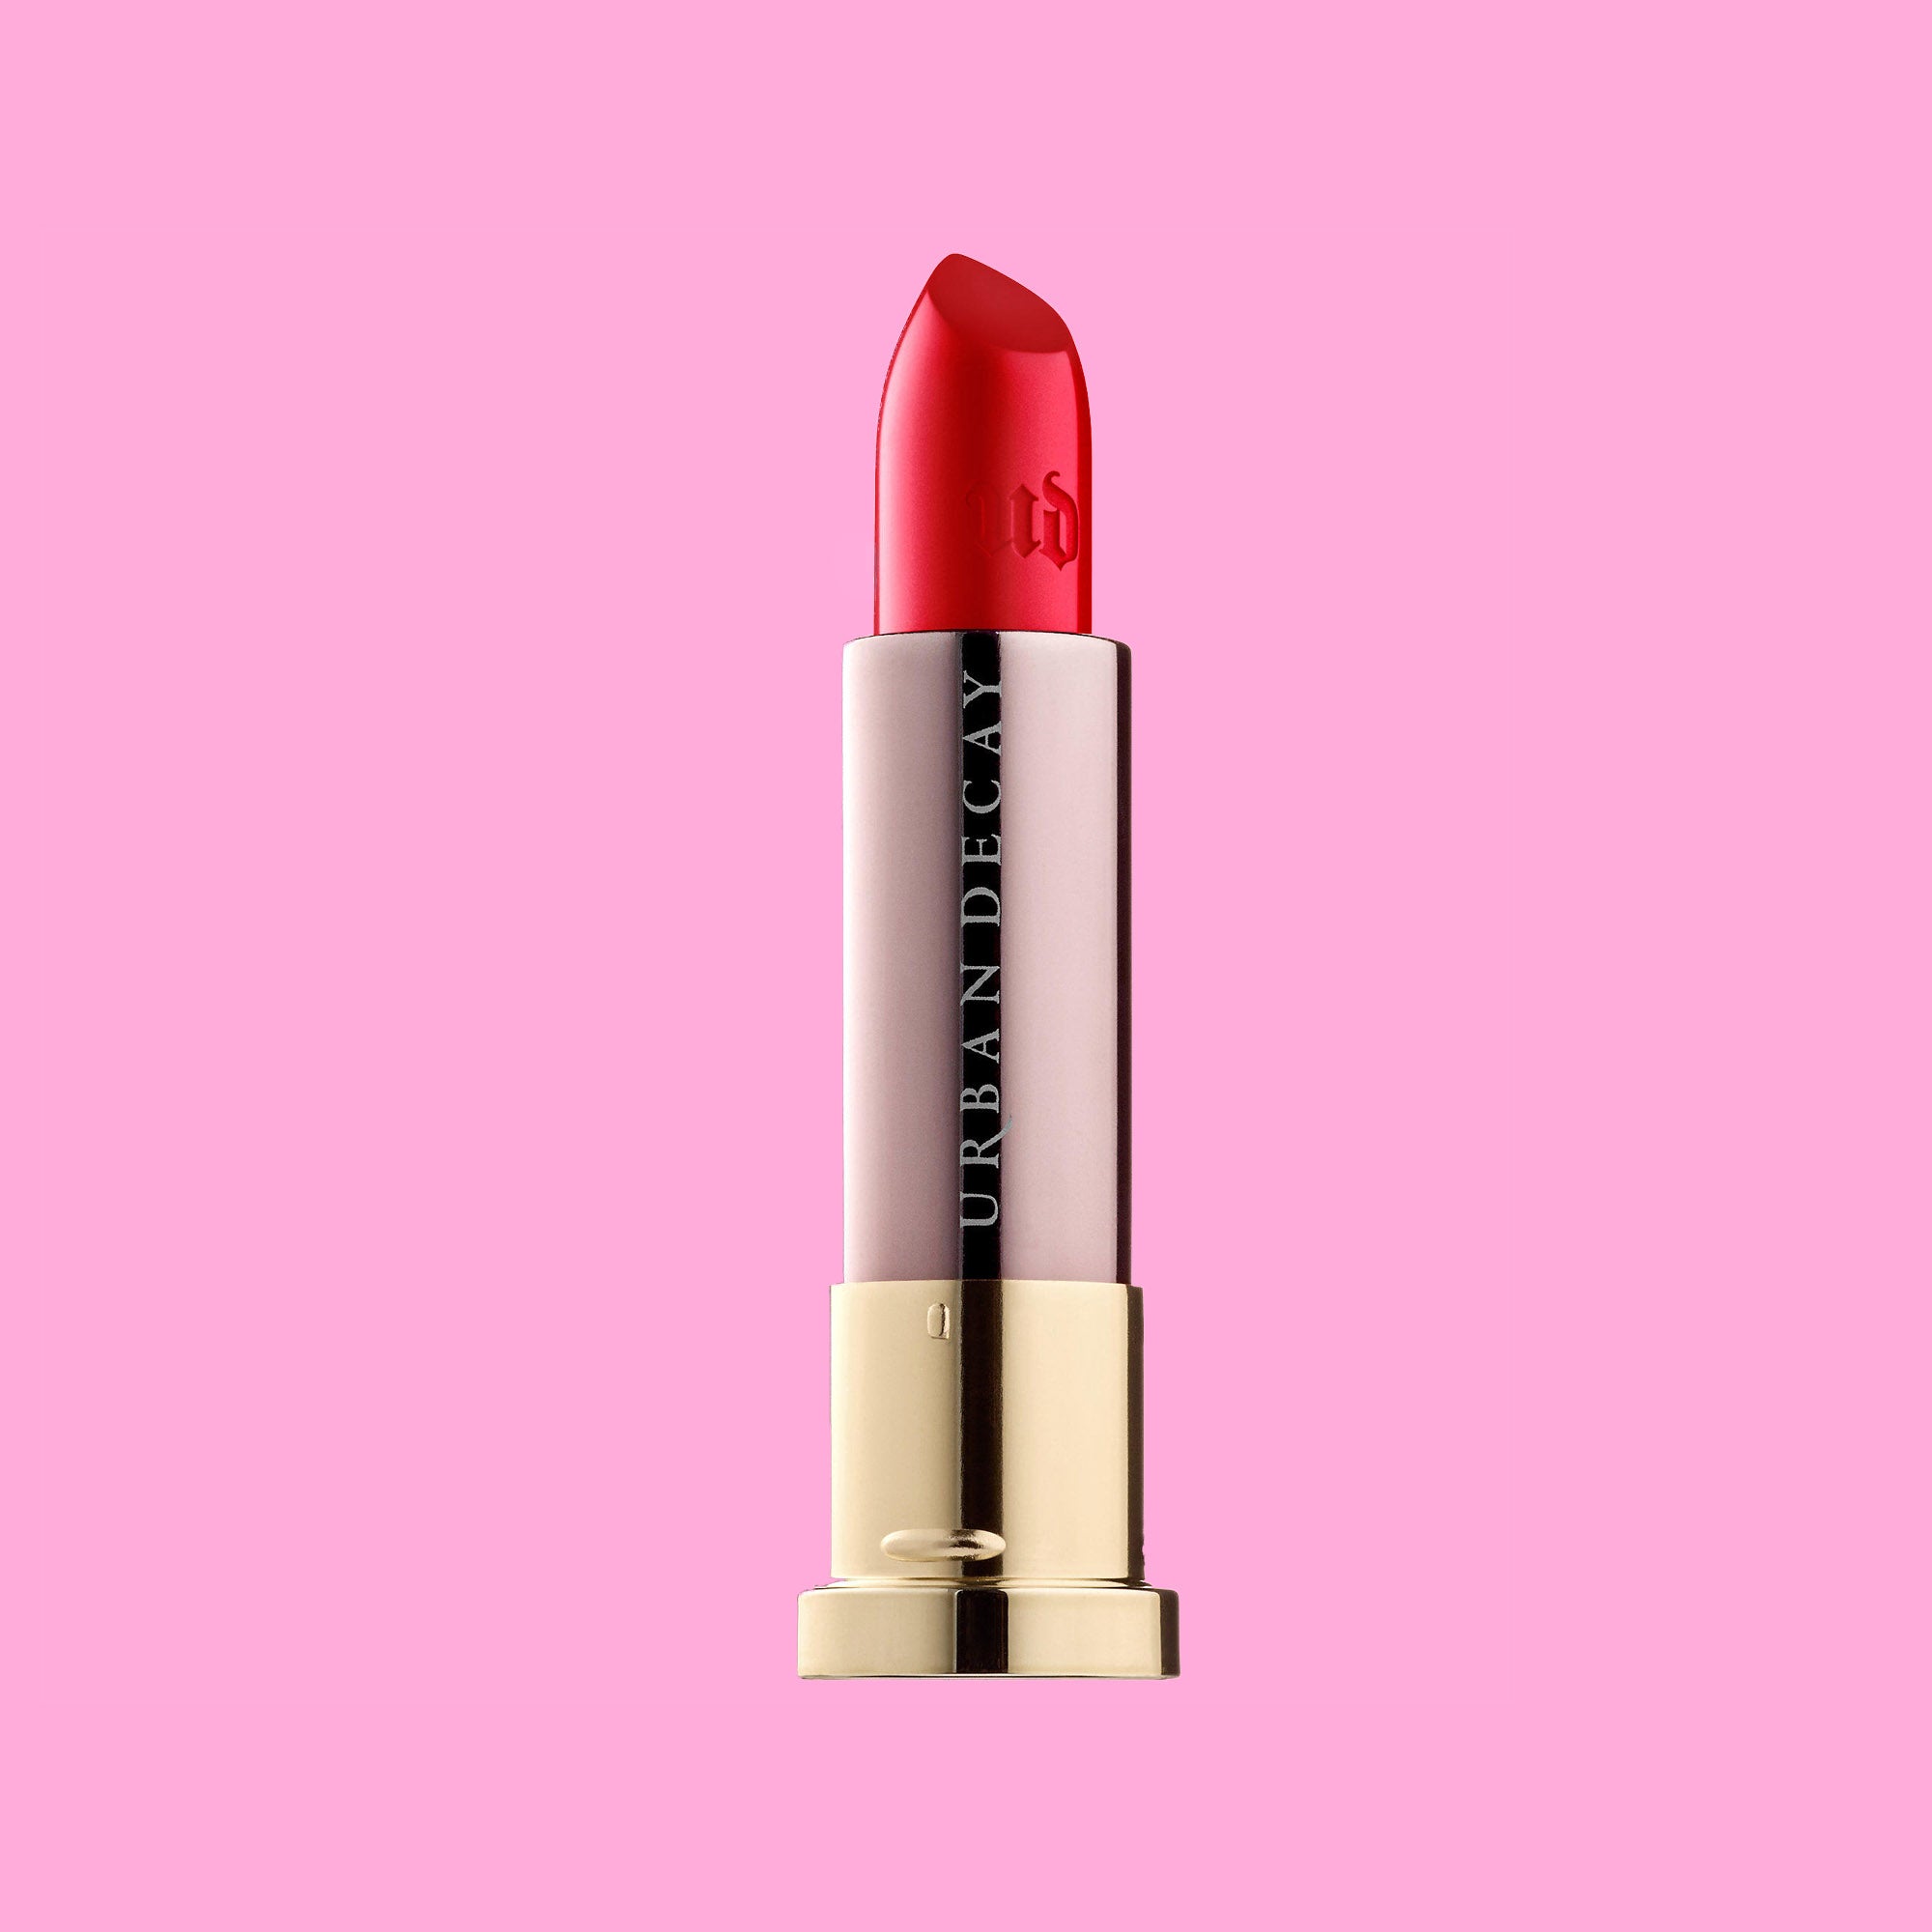 These 13 Stunning Pink And Red Lipsticks Are Perfect For Valentine's Day
